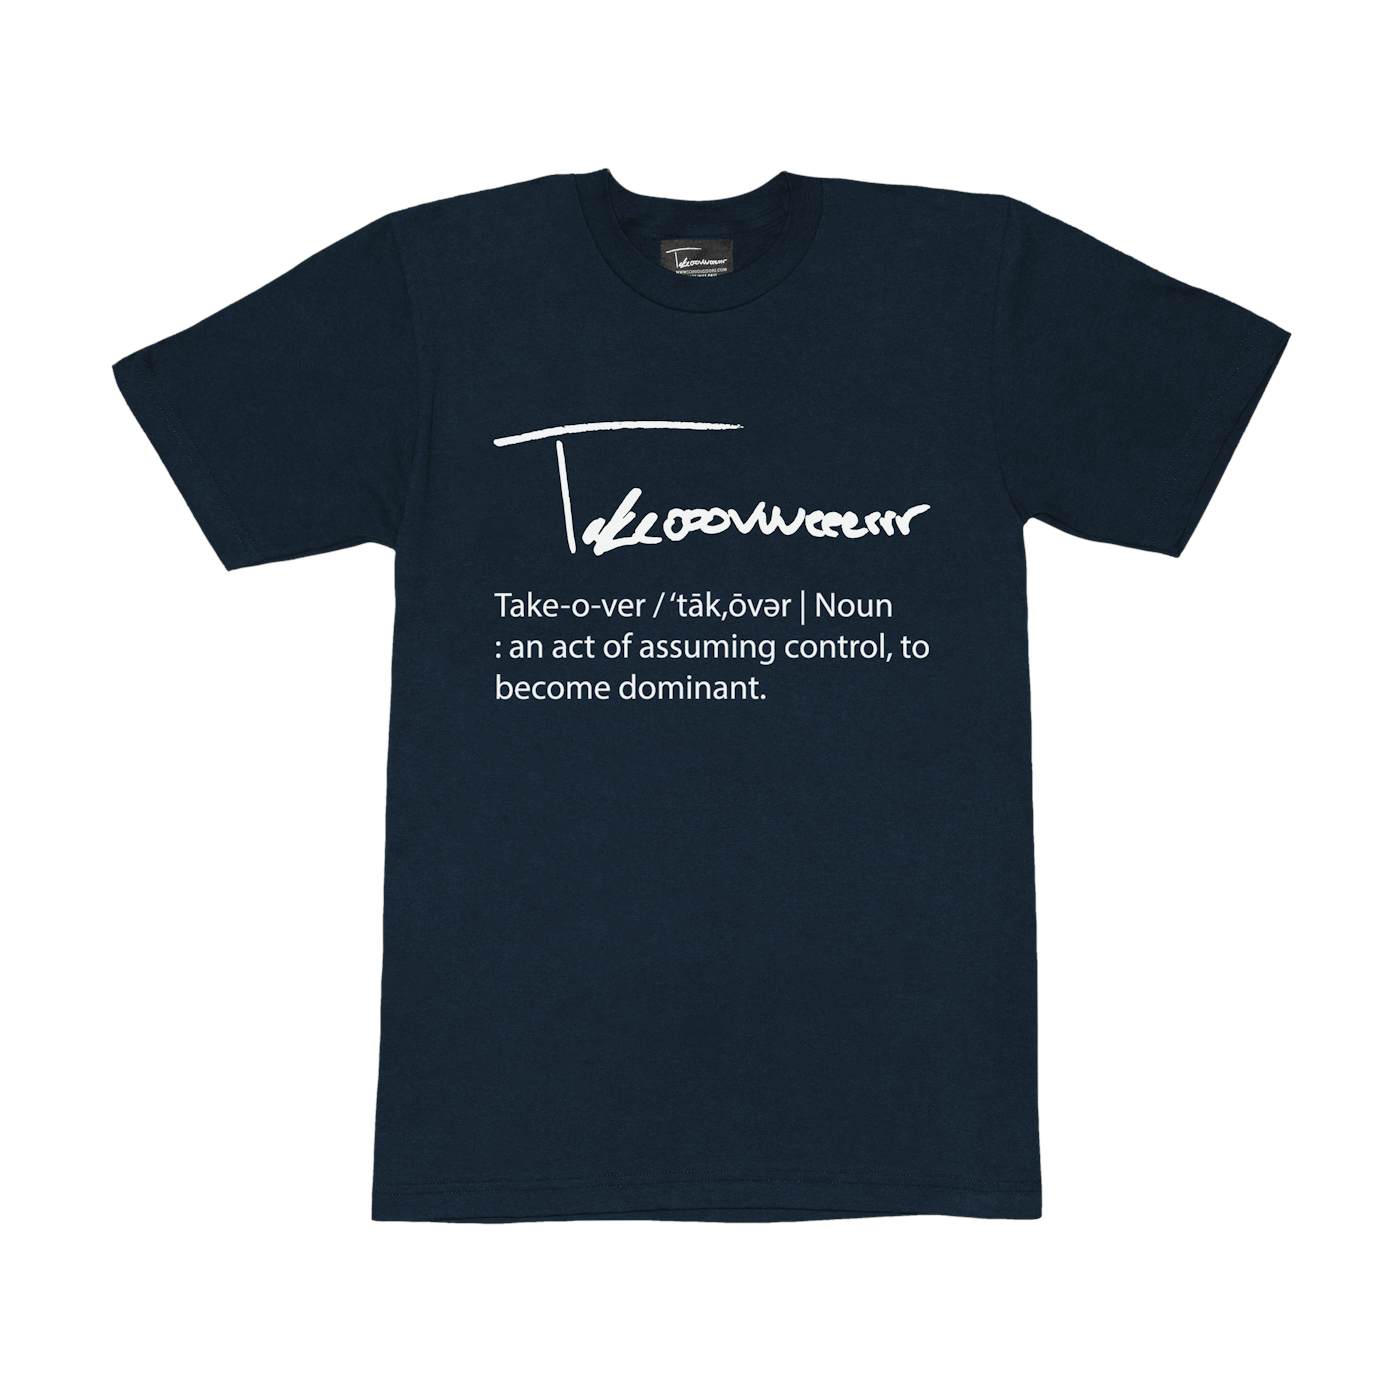 Taylor J Takeover Definition Tee (Navy/White)